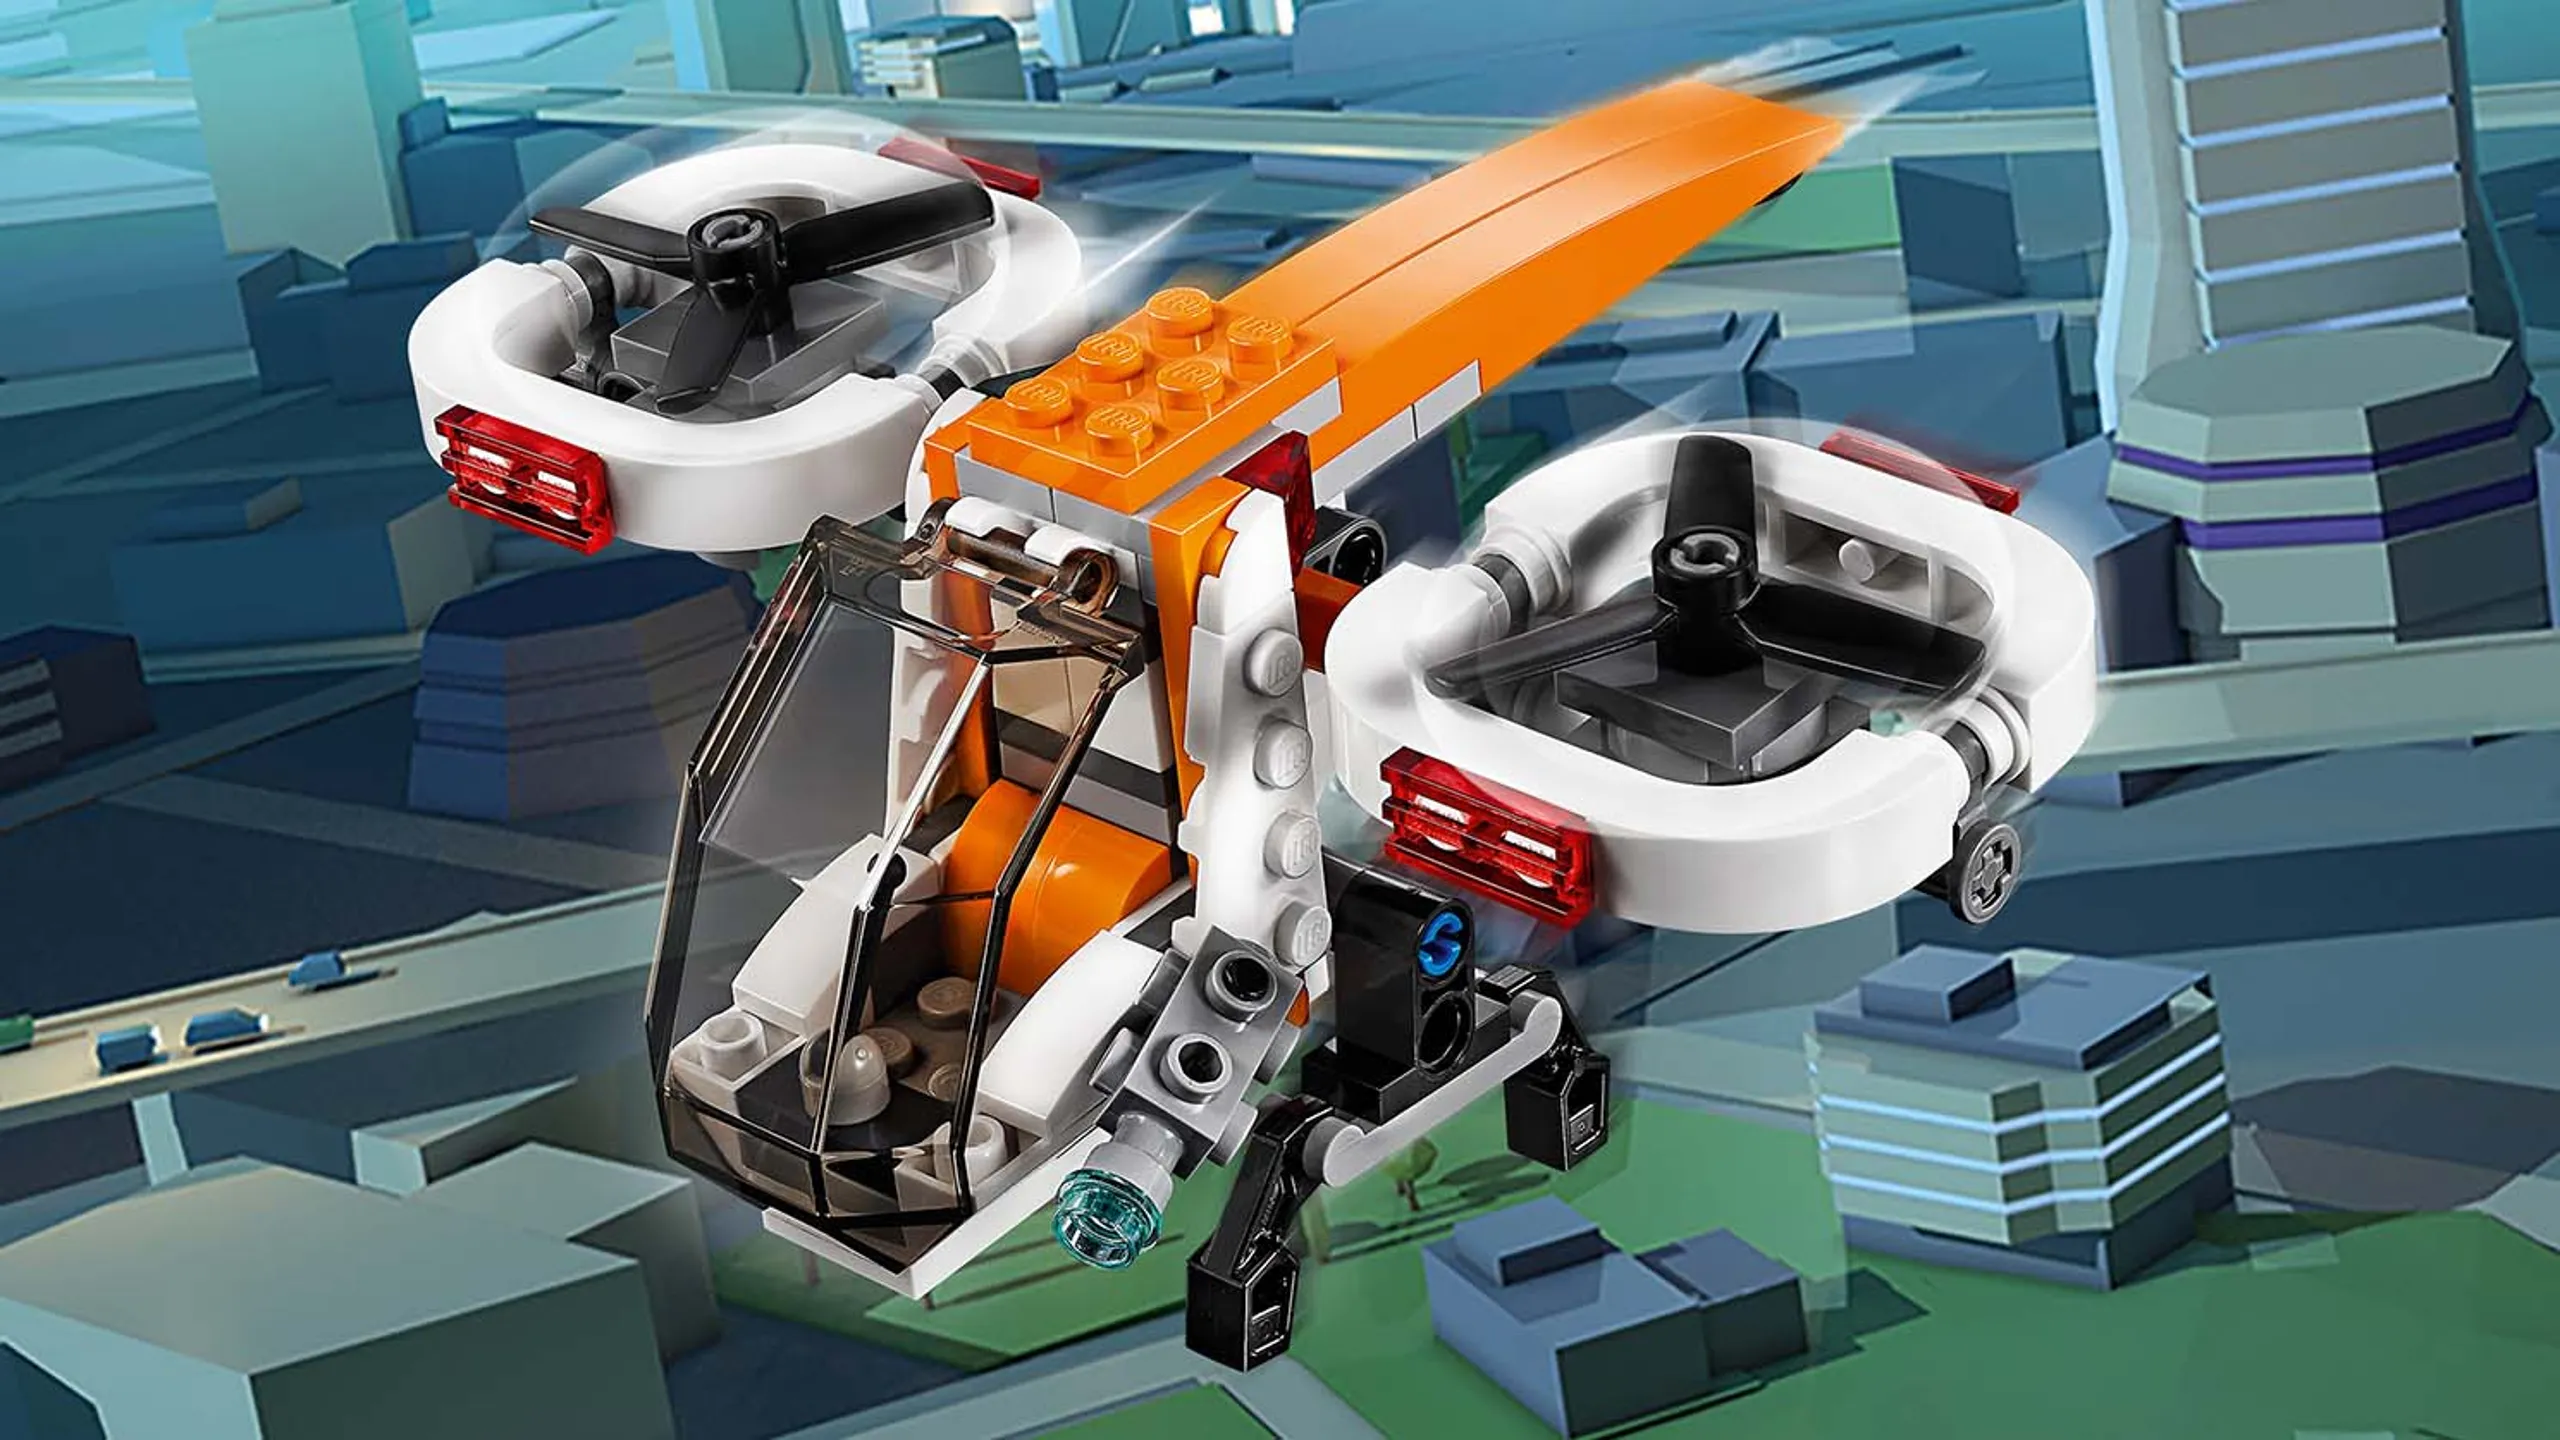 LEGO Creator 3-in-1 Drone Explorer - 31071 - The drone is flying above the city, taking a bird's-eye view of the landscape.